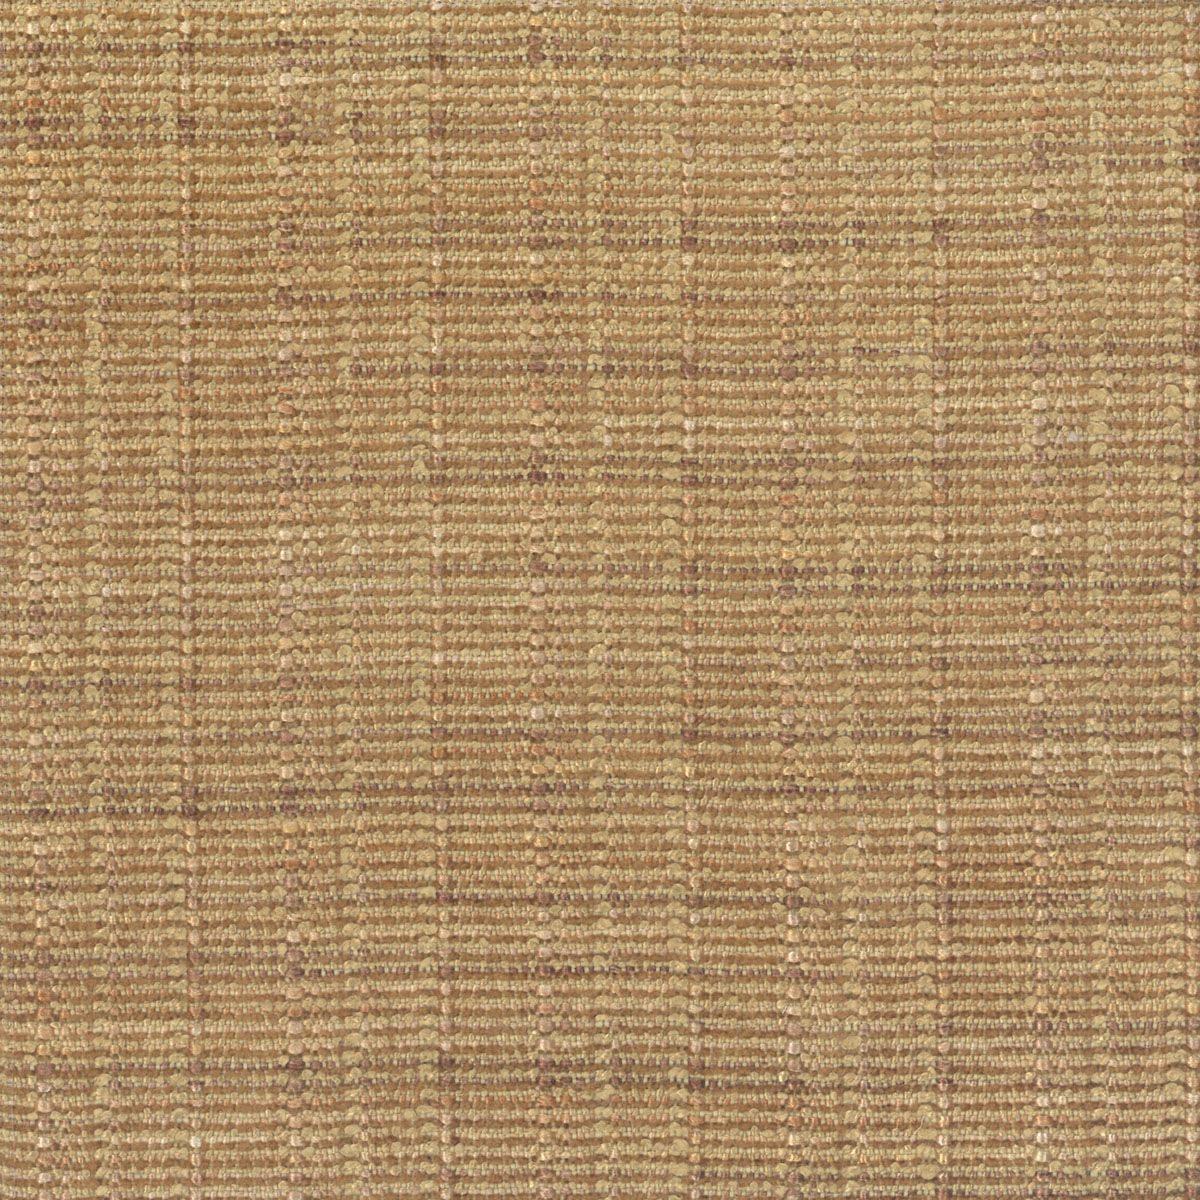 Maddox fabric in sisal color - pattern number VW 0001F017 - by Scalamandre in the Old World Weavers collection